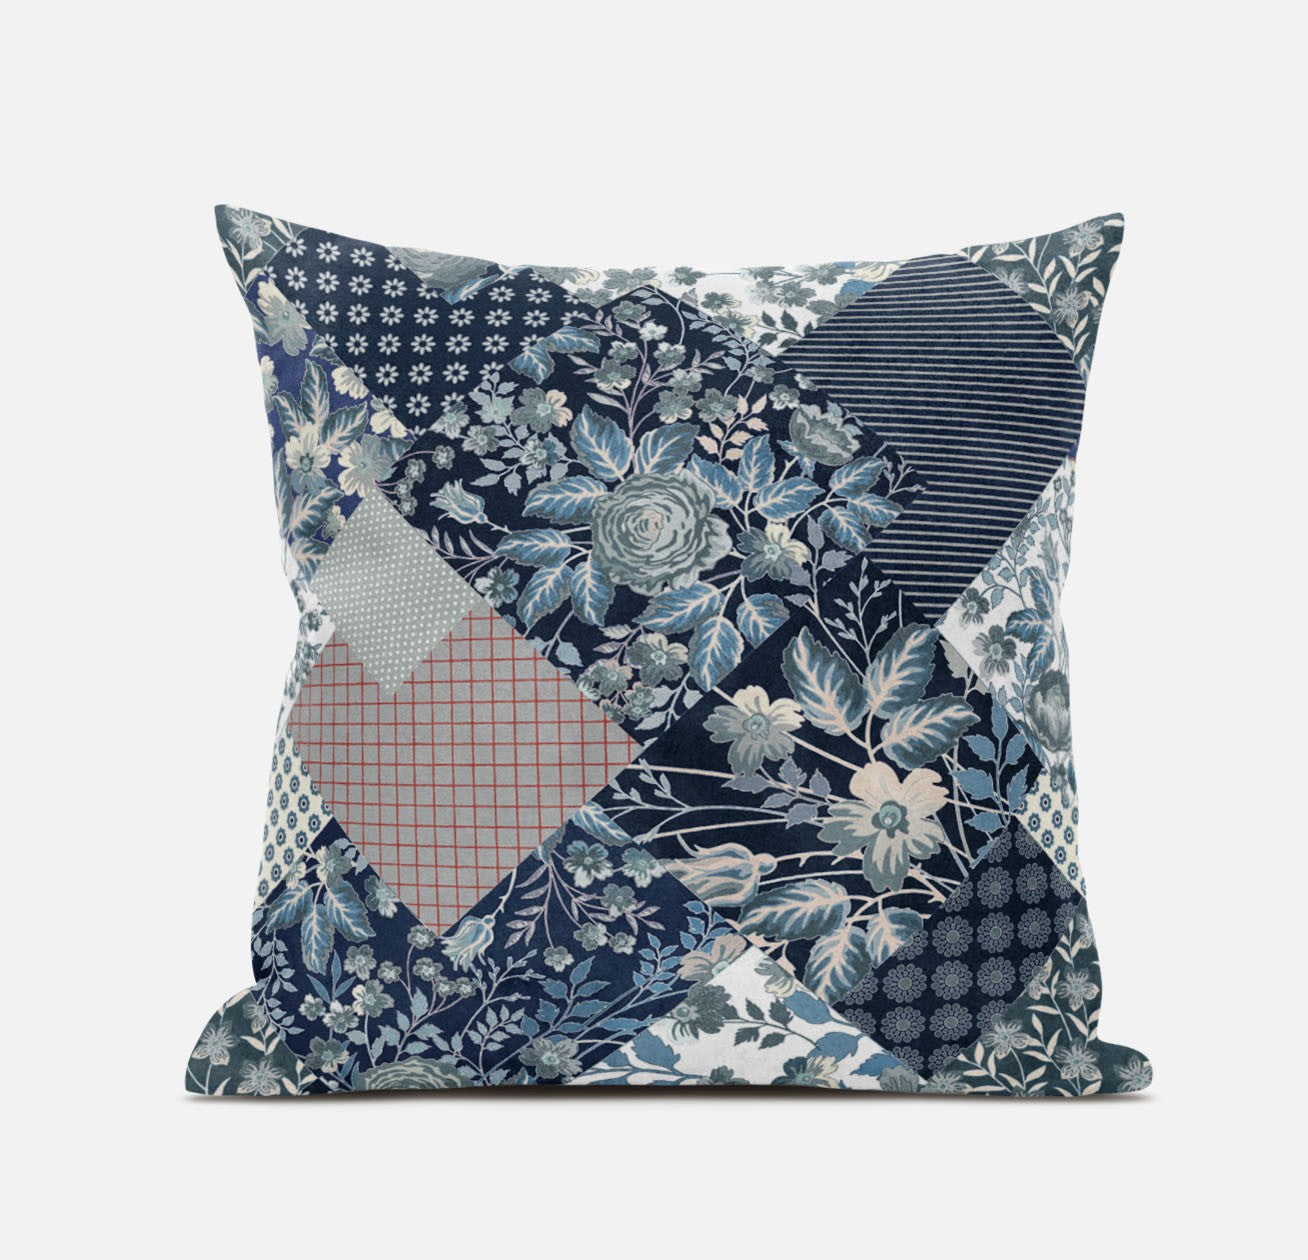 18" Deep Blue Gray Floral Suede Throw Pillow